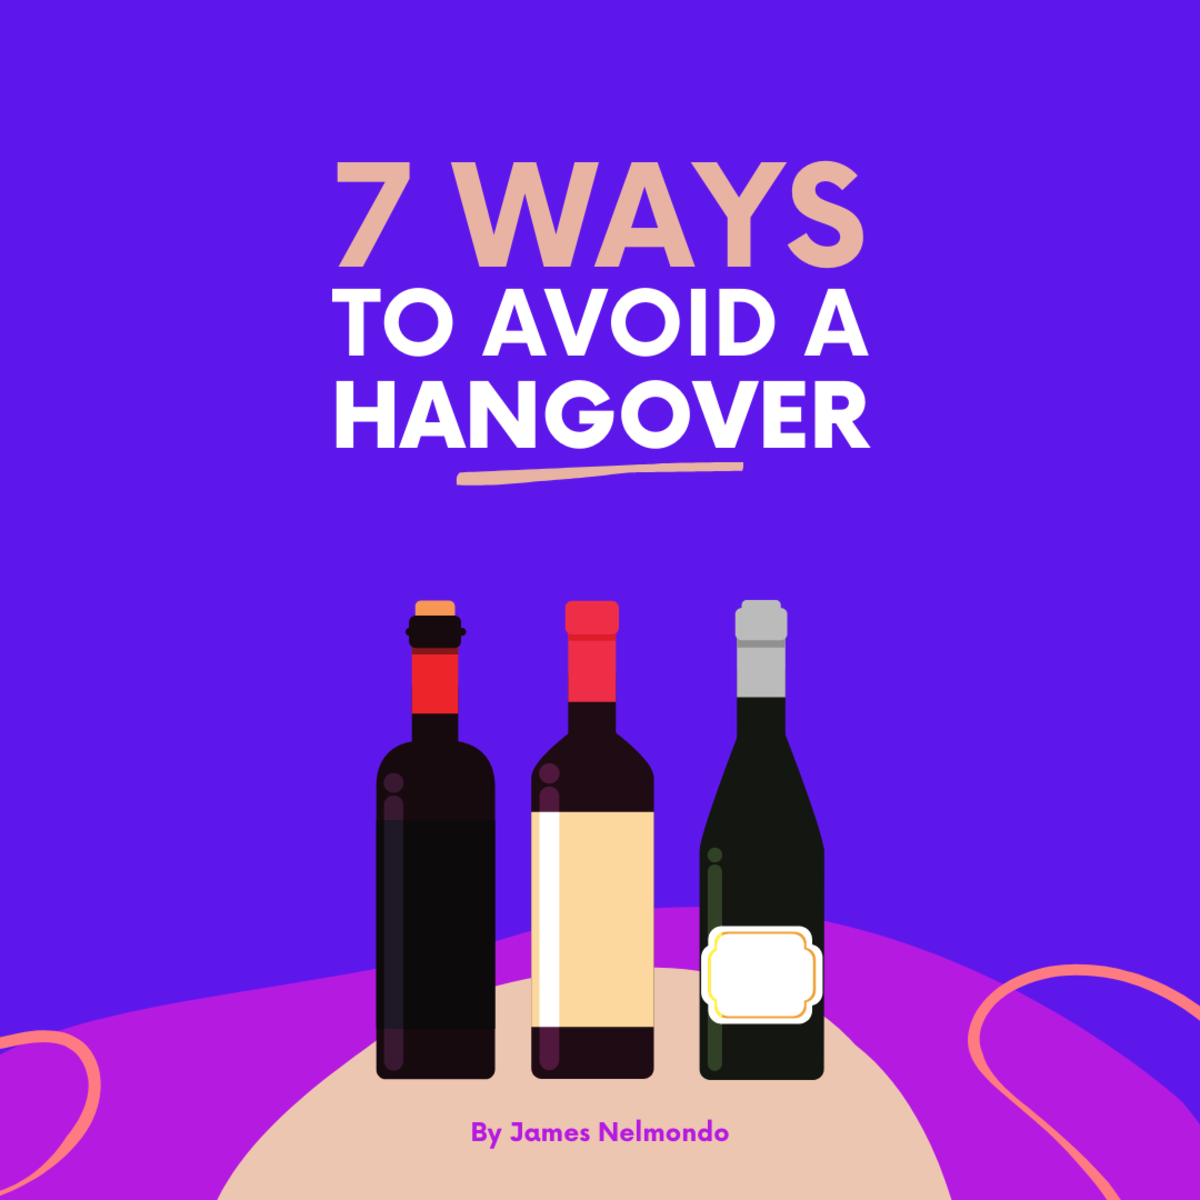 7 Simple Ways to Prevent or Treat the Symptoms of a Hangover